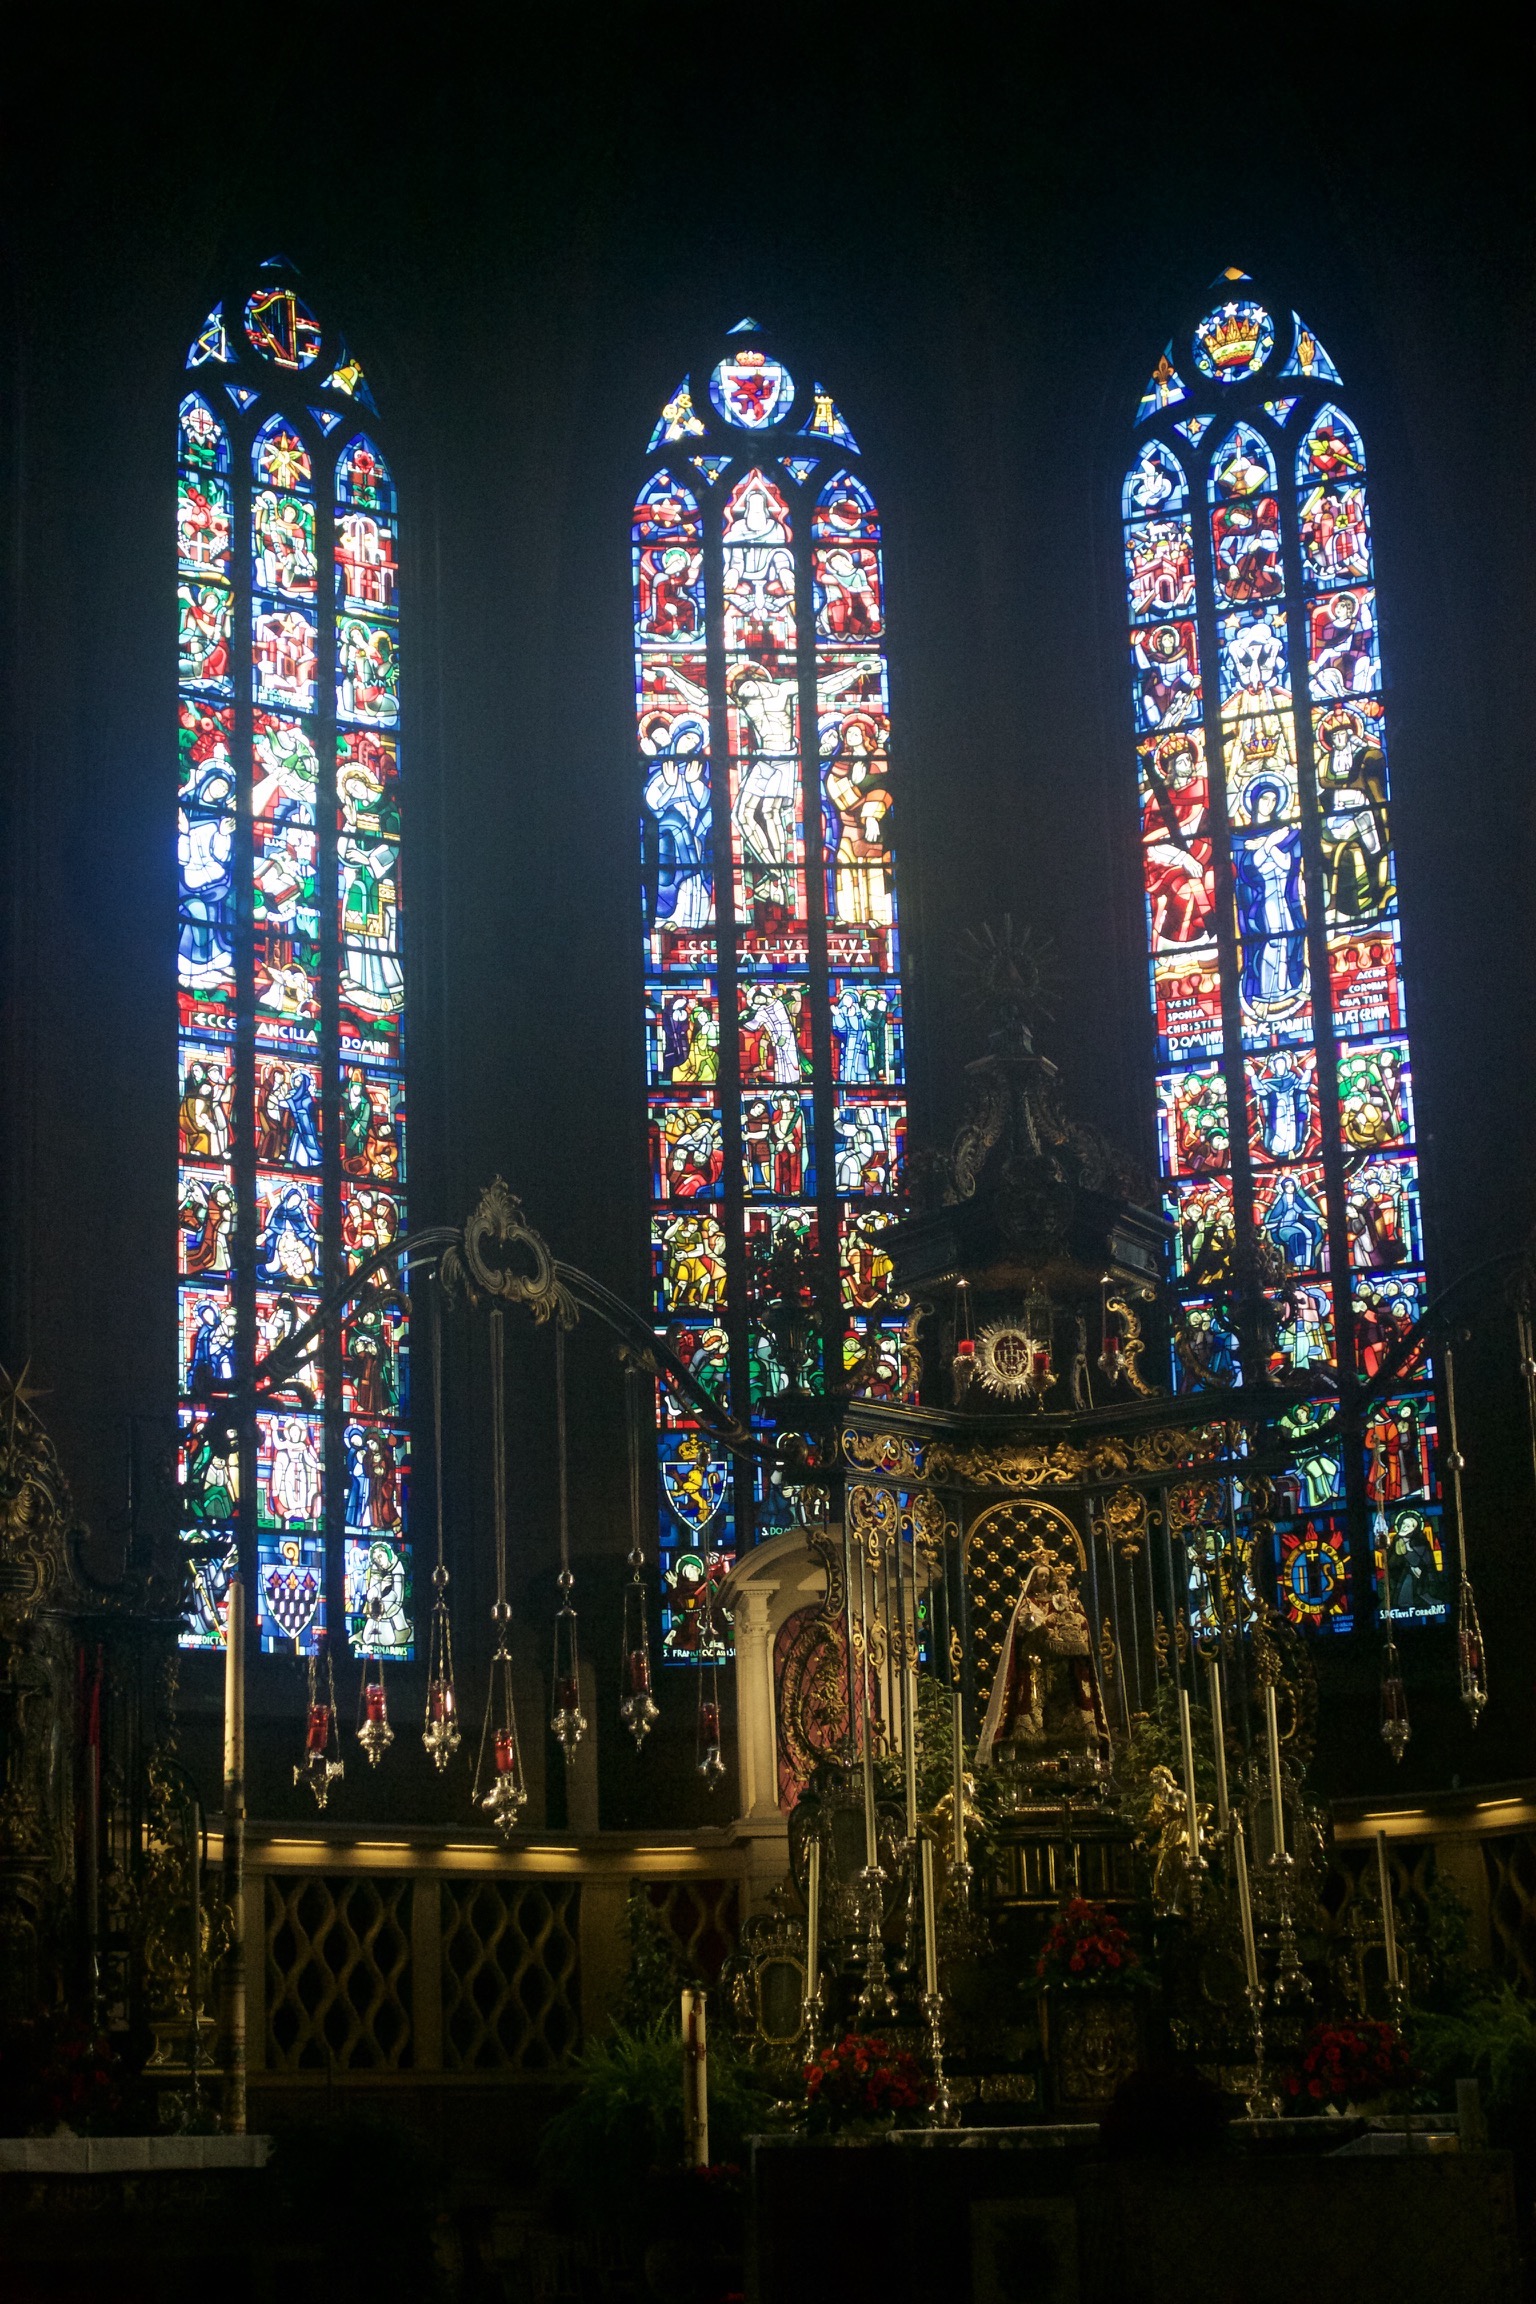 An ornate Catholic altar back lit by soaring stained glass windows.